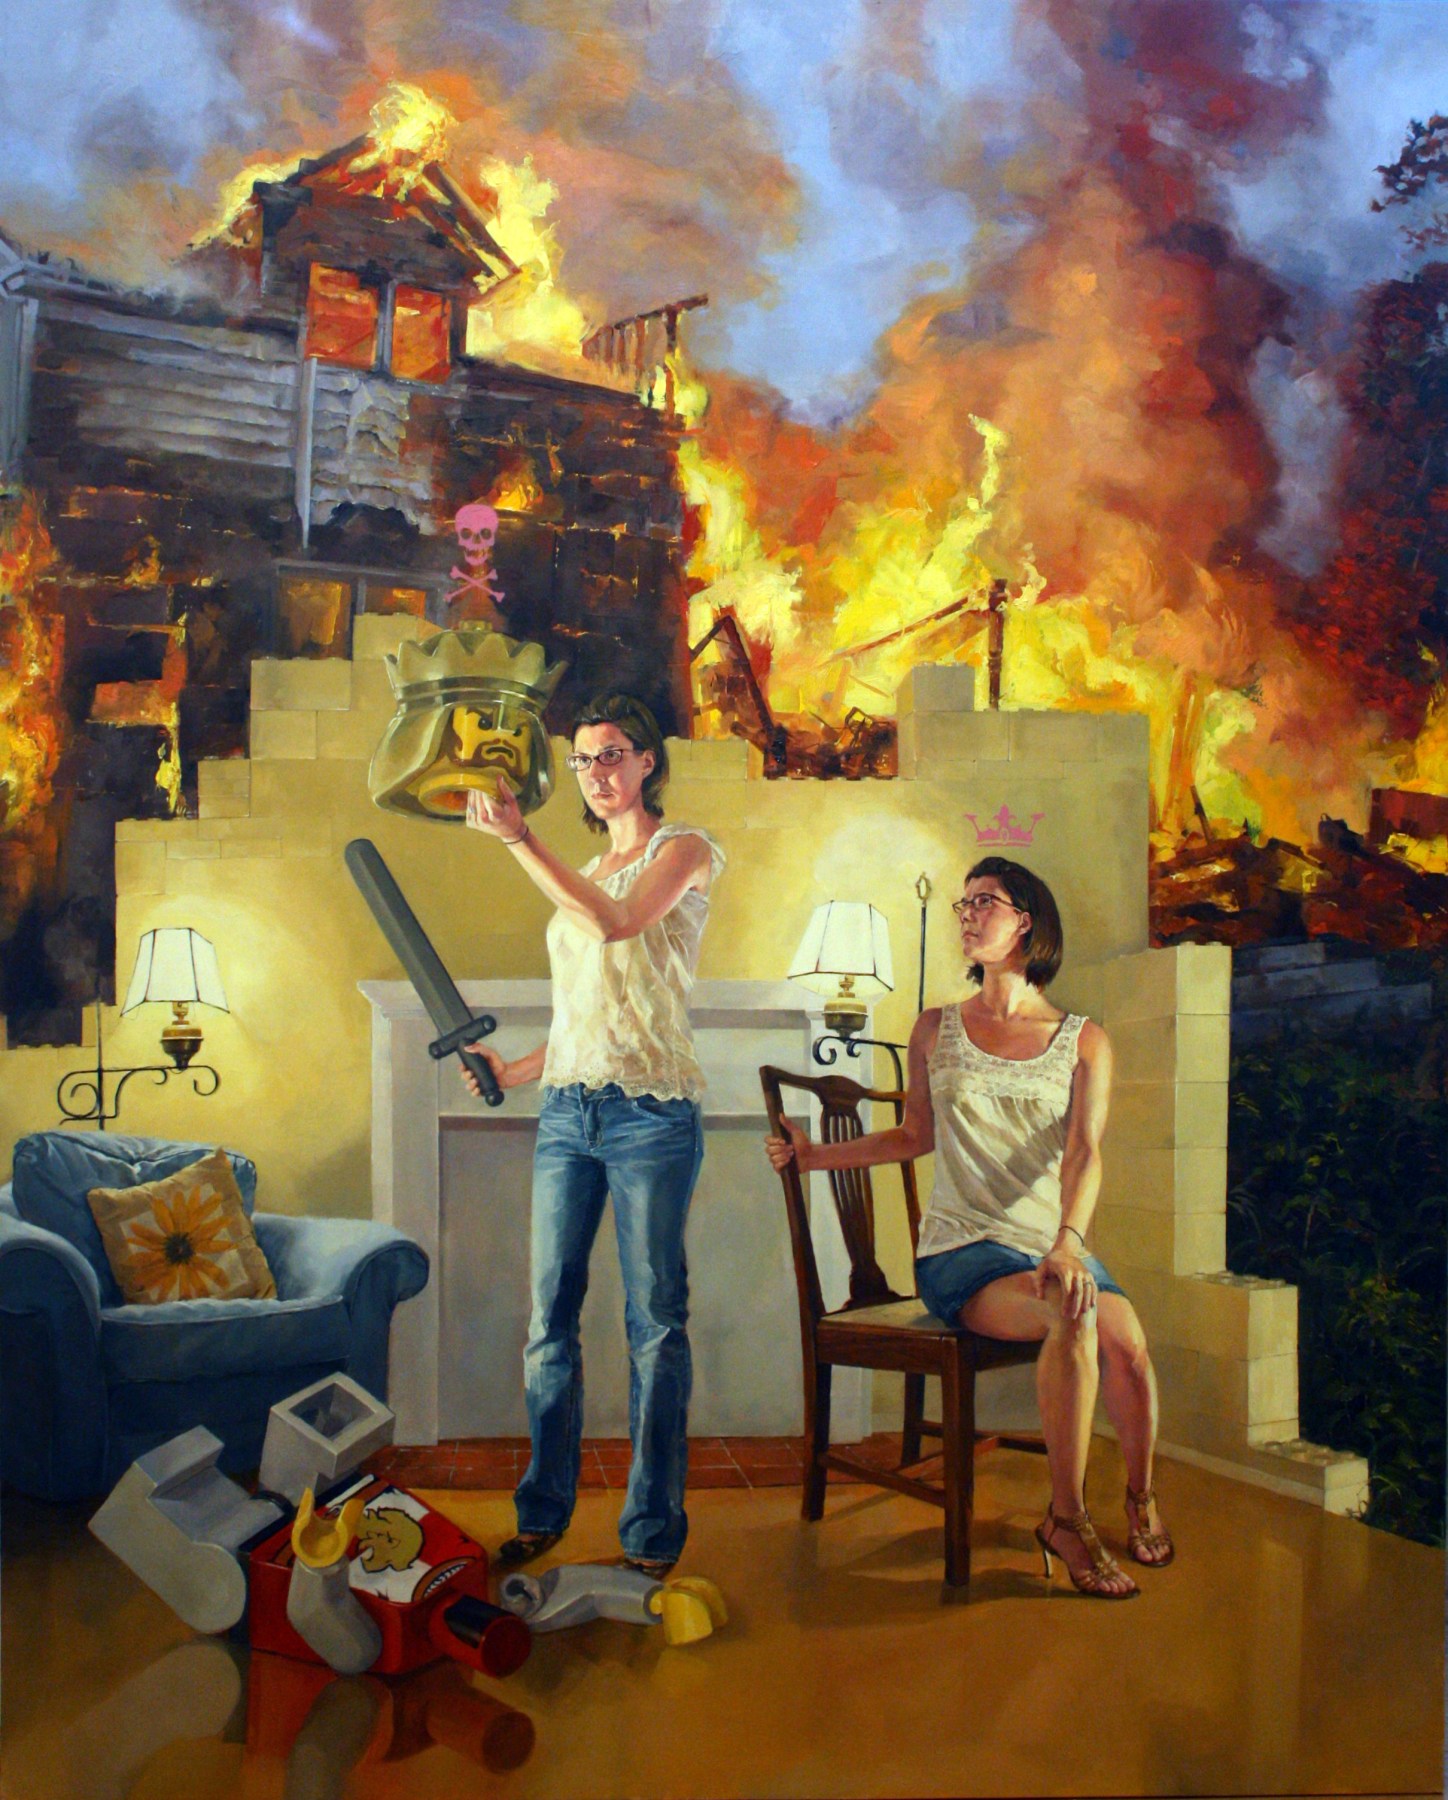 NATHANIEL ROGERS The King is Dead 2011, oil on panel, 40 x 32 inches